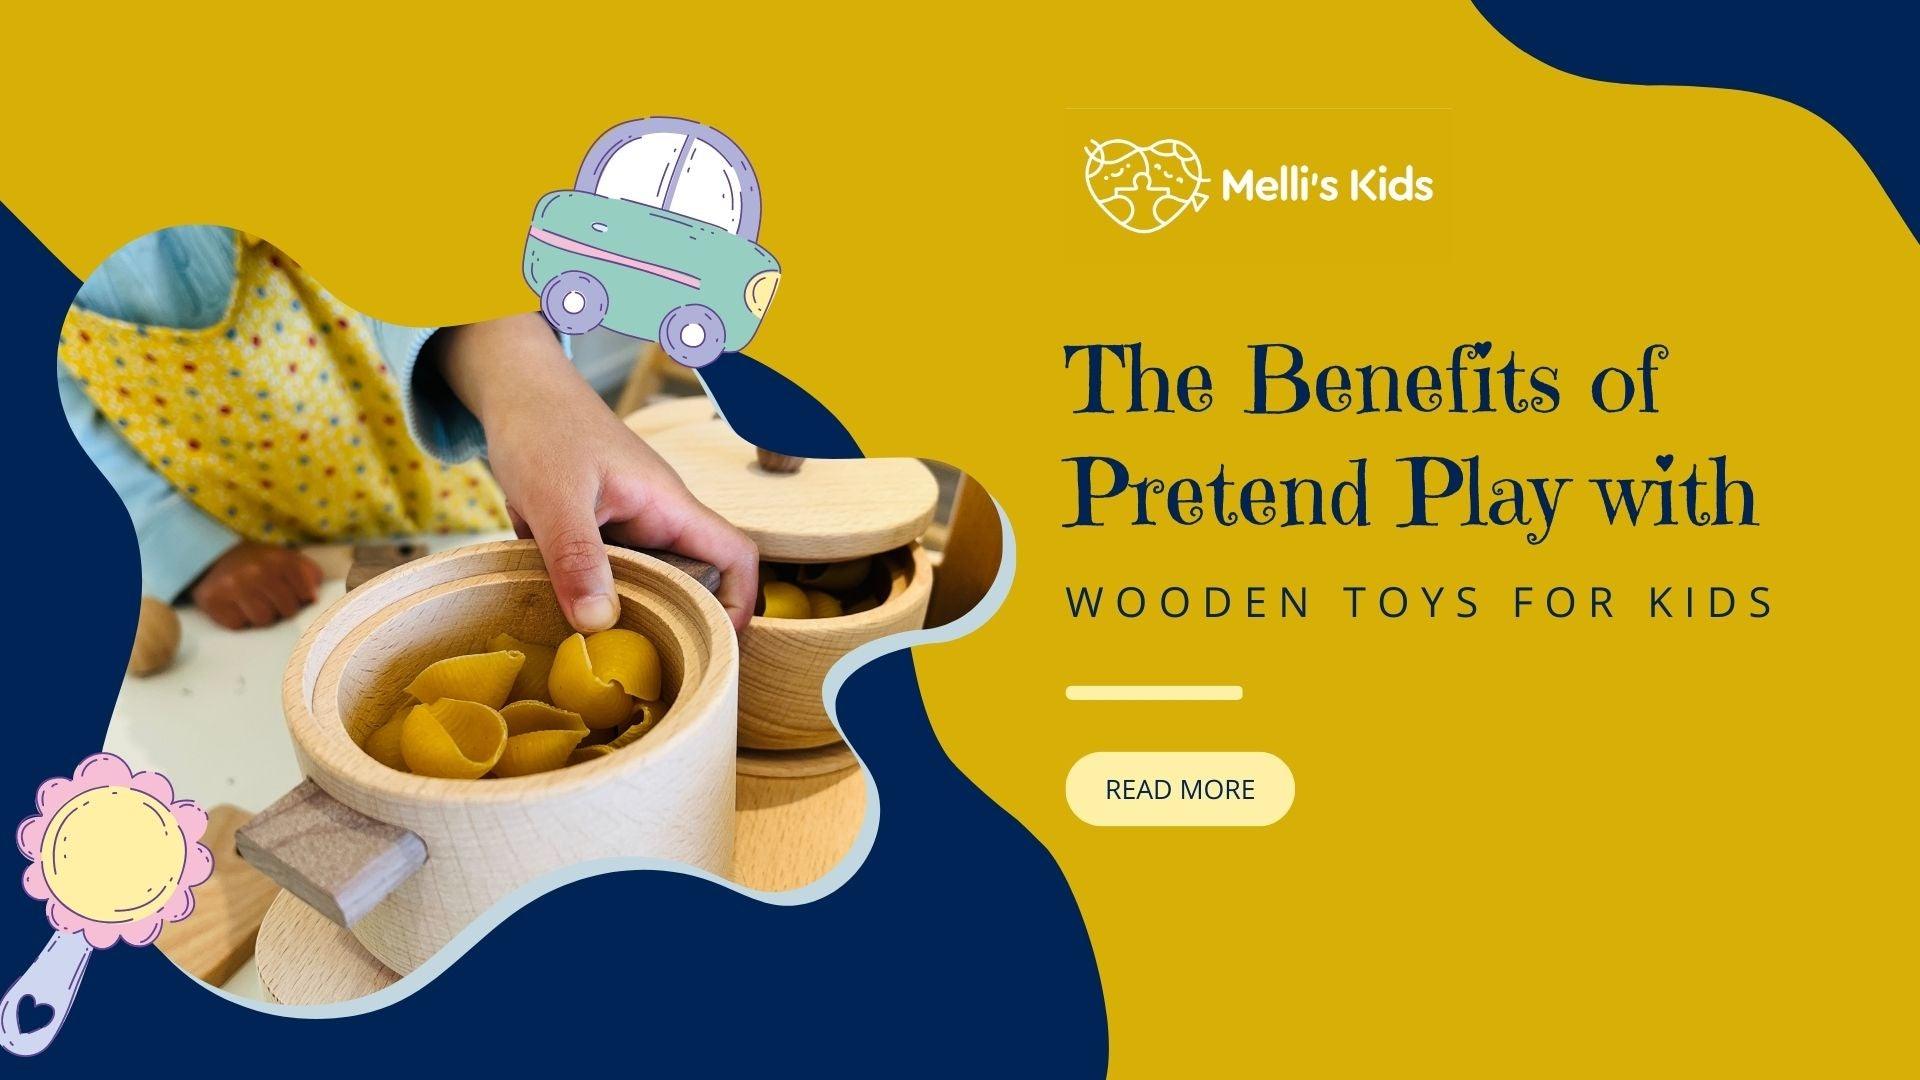 The Benefits of Pretend Play with Wooden Toys for Kids - Melli's Kids